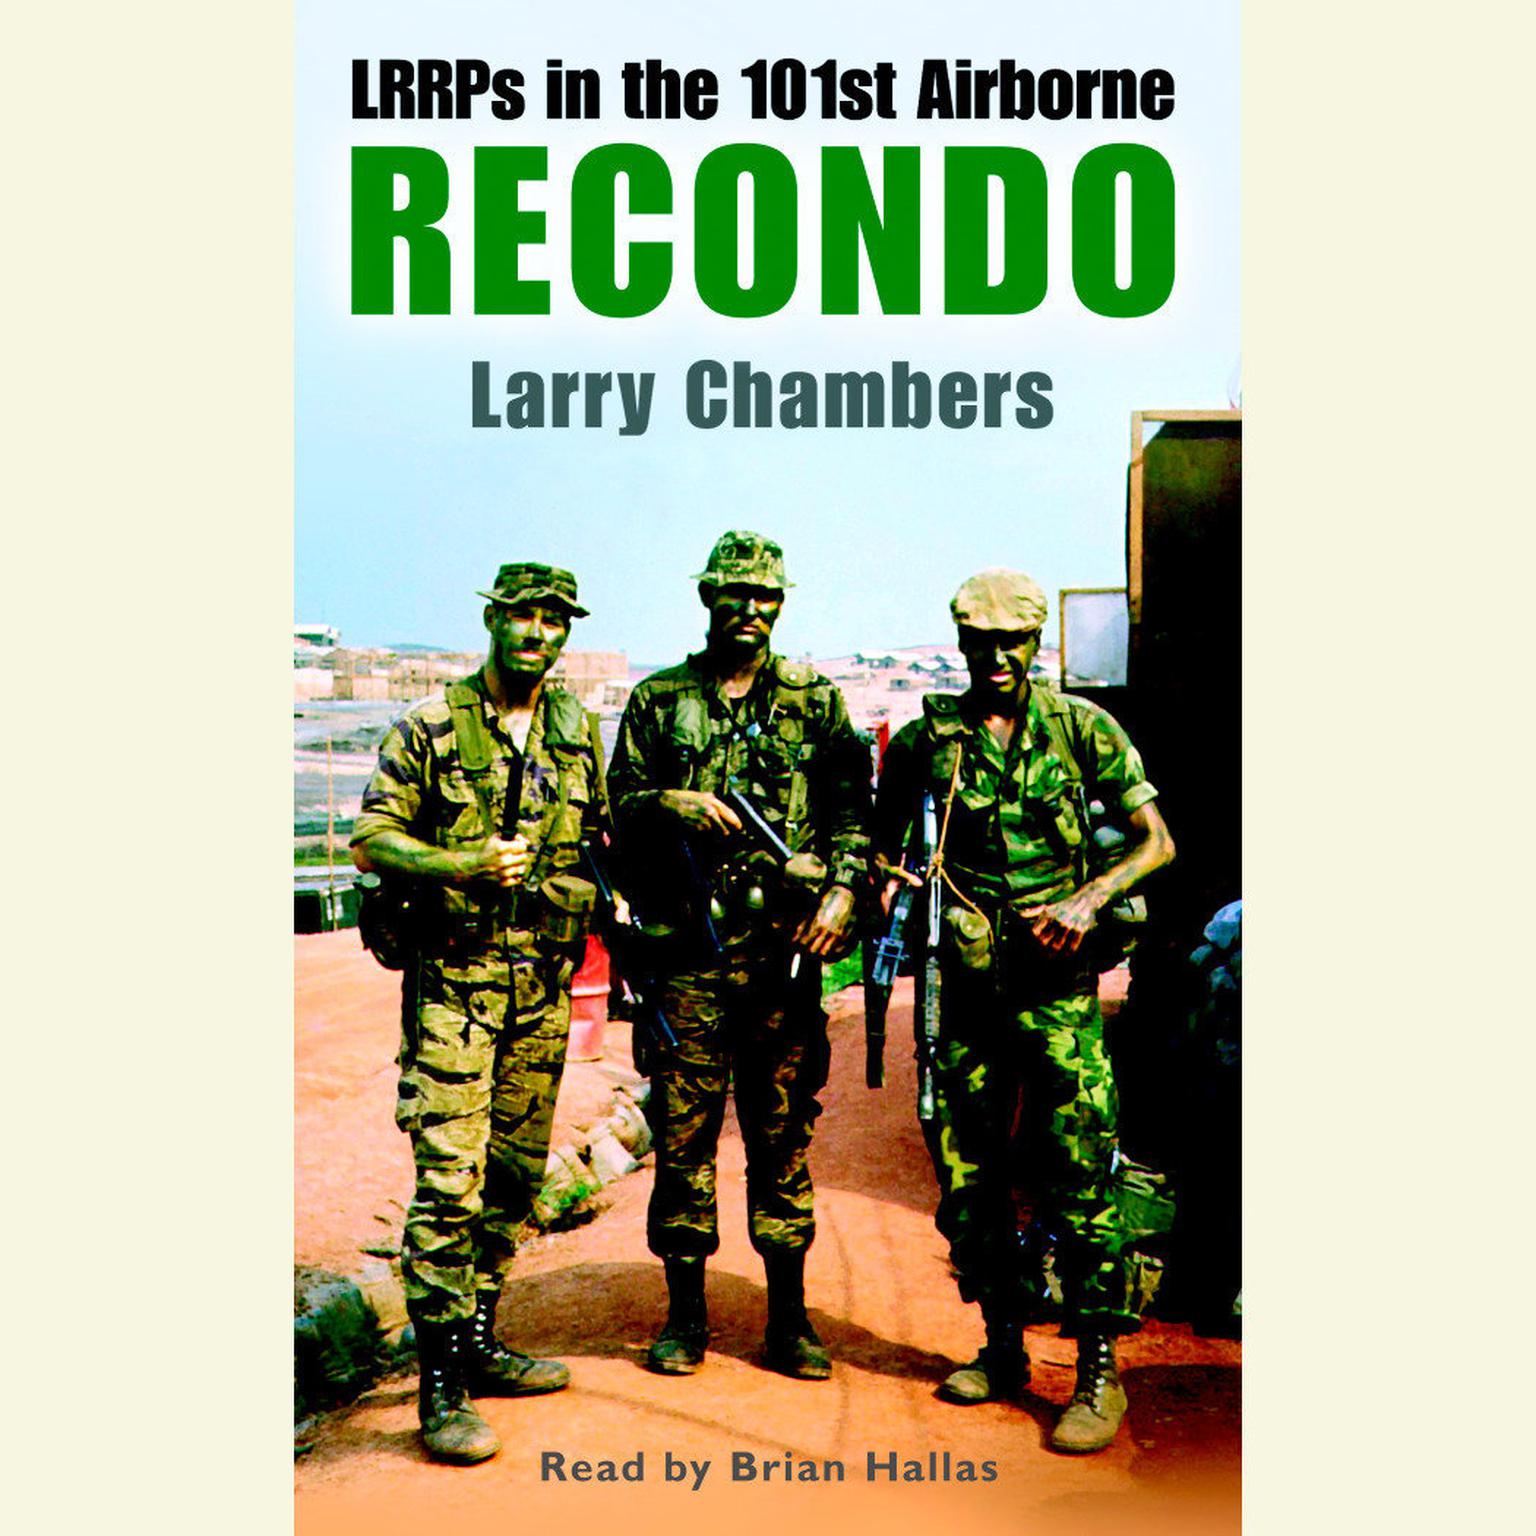 Recondo: LRRPs in the 101st Airborne (Abridged) Audiobook, by Larry Chambers